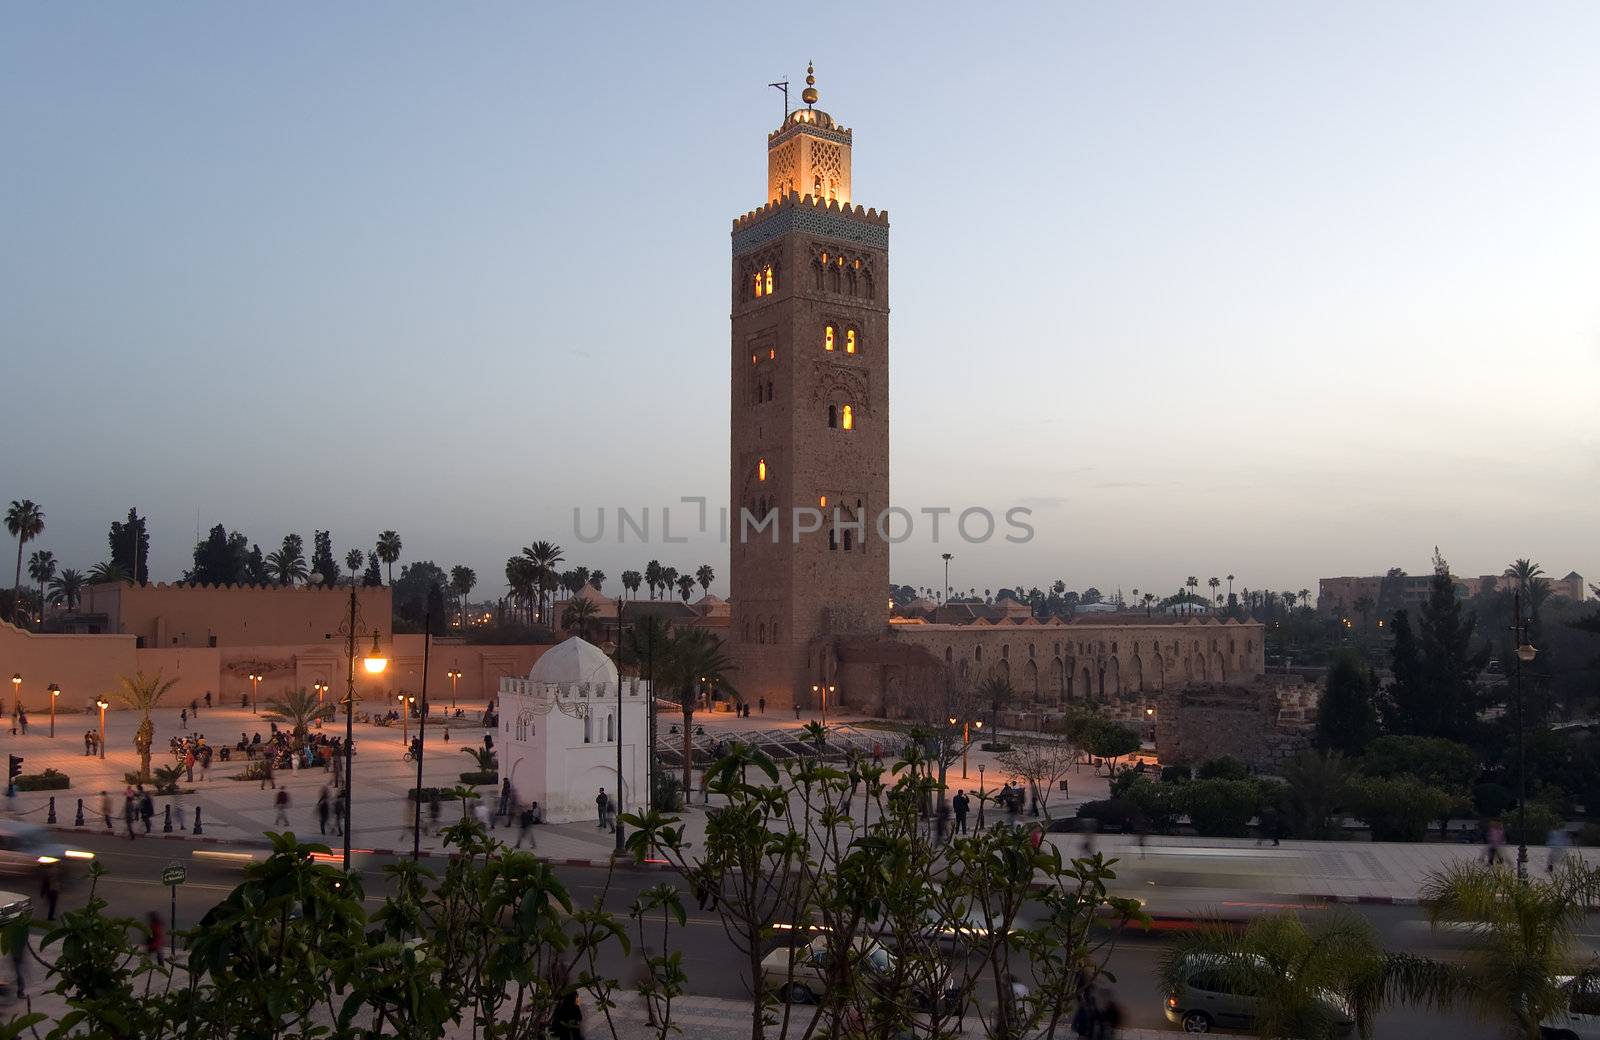 The marvellous Koutoubia Minaret and the Mosque in the Marrakesh center, Moroc